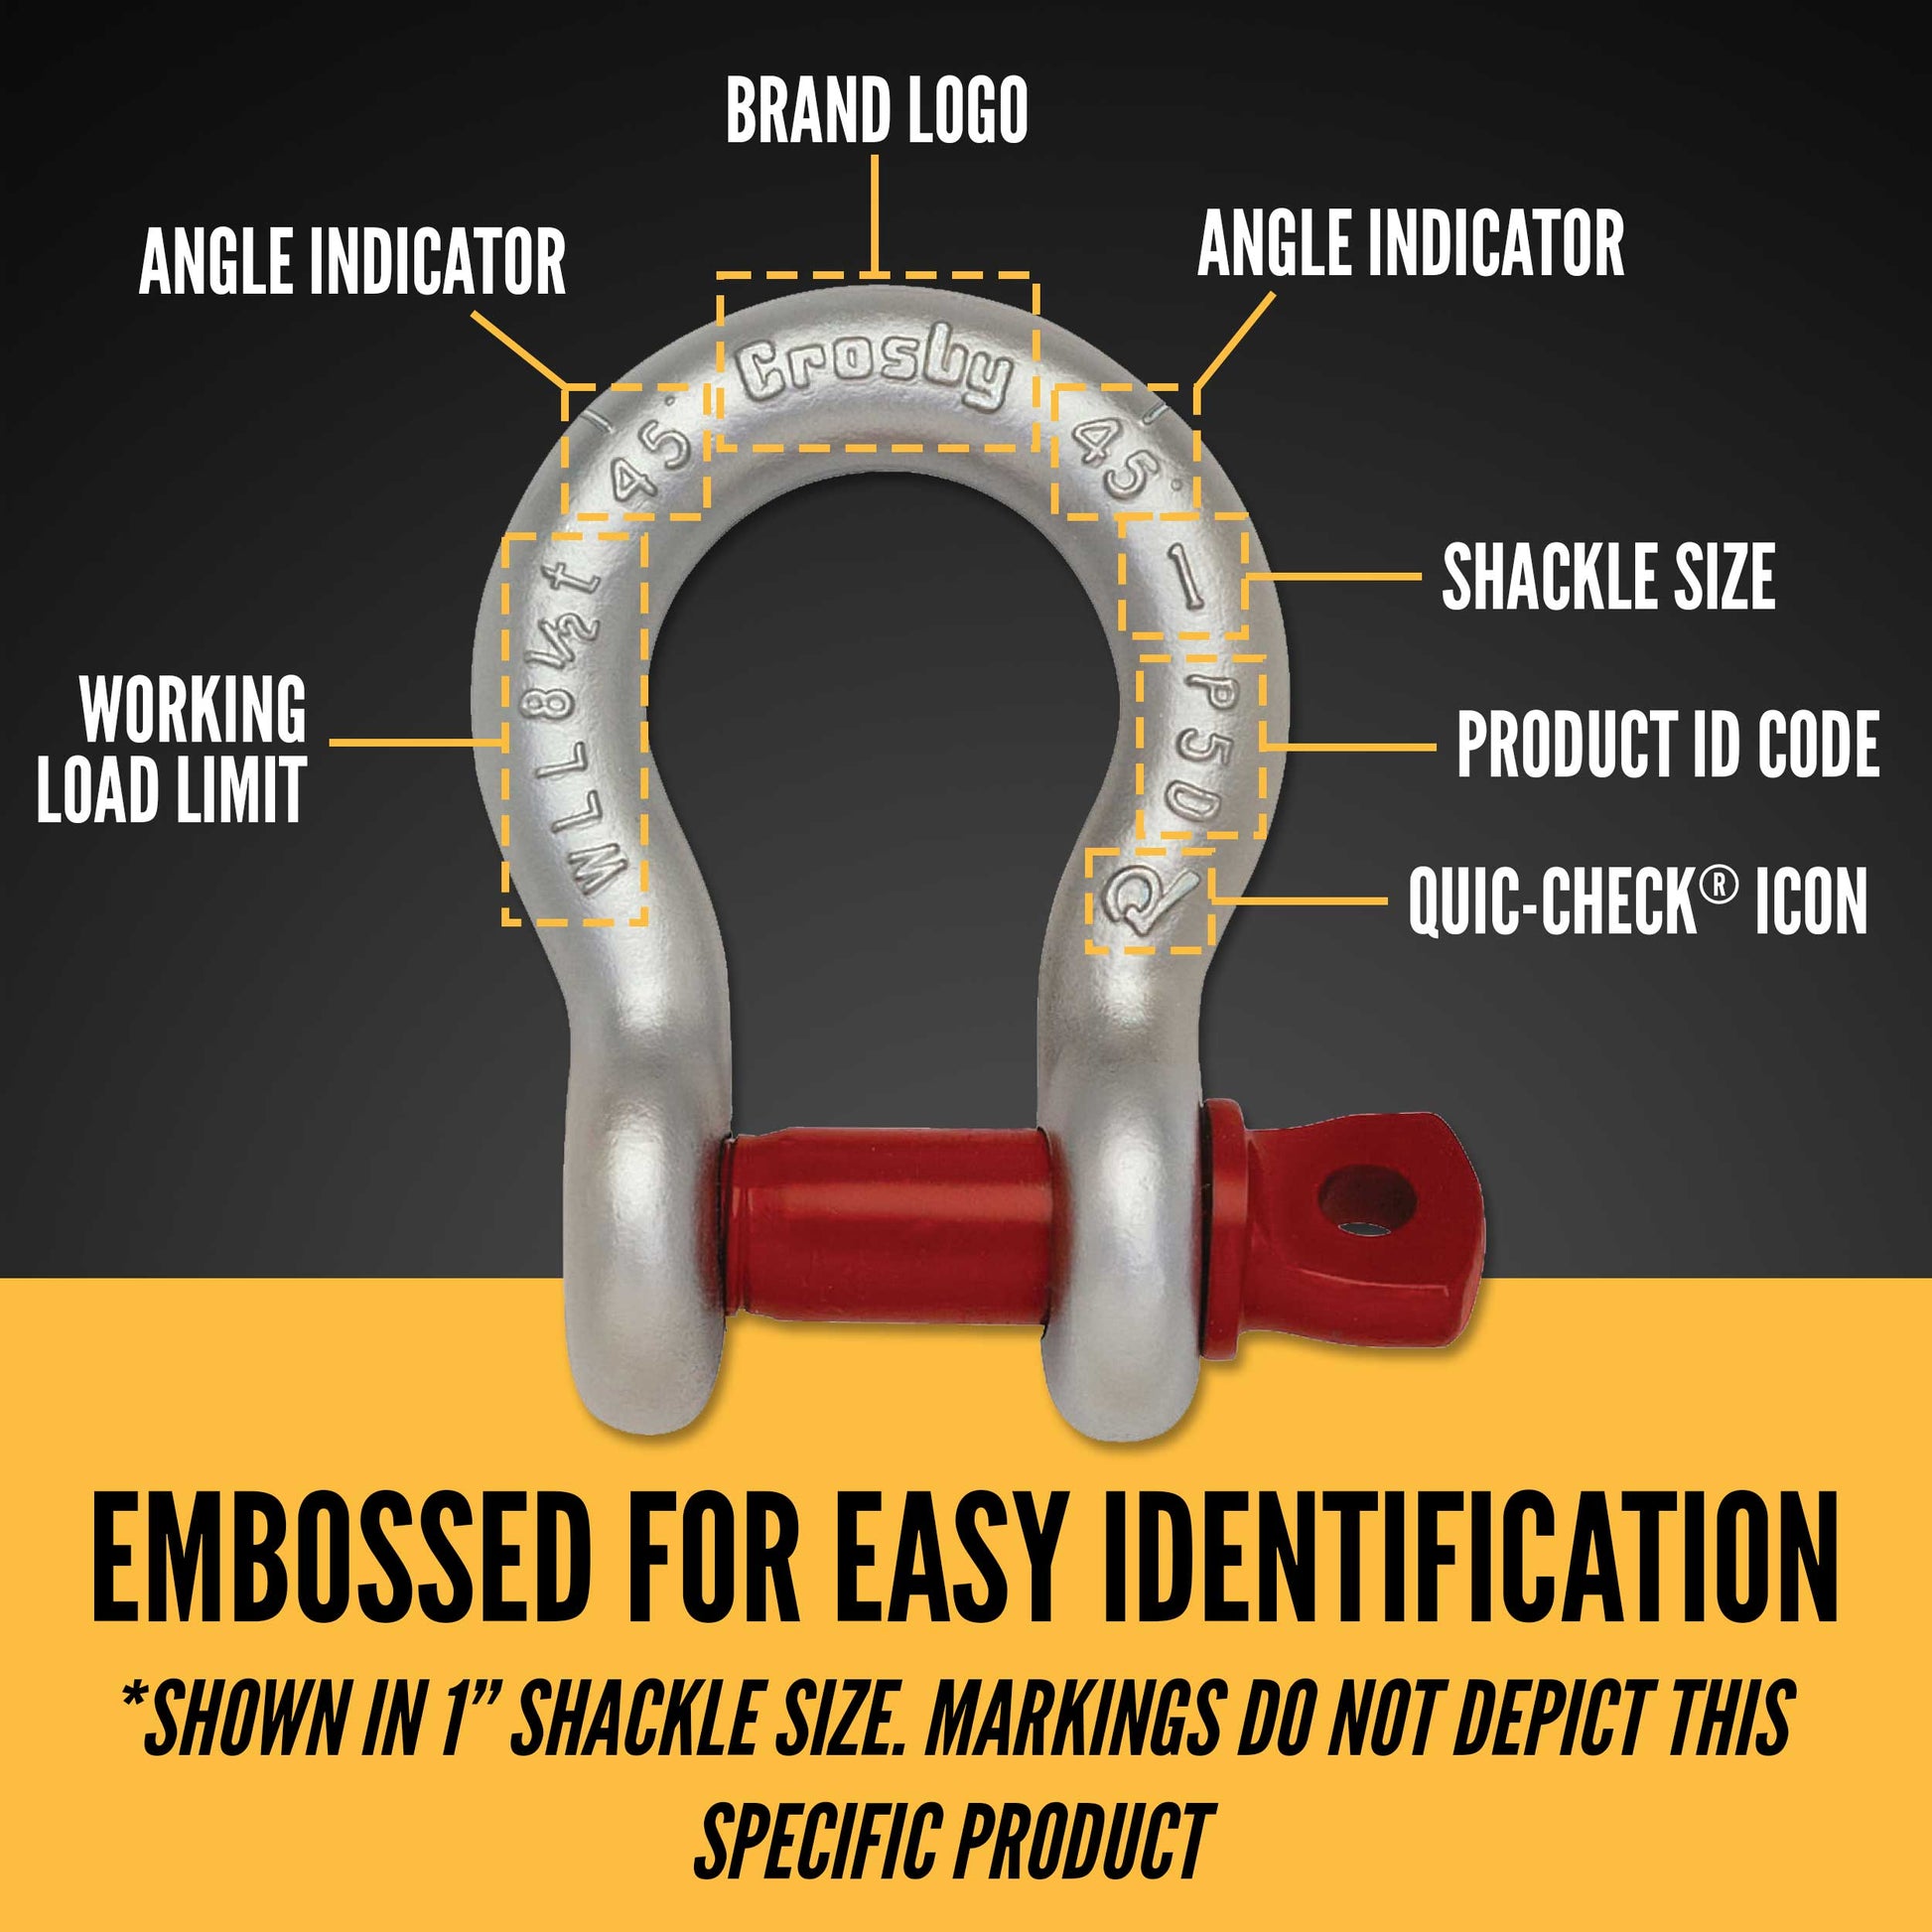 3/16" Crosby® Screw Pin Anchor Shackle | G-209 - 0.33 Ton embossed for easy identification